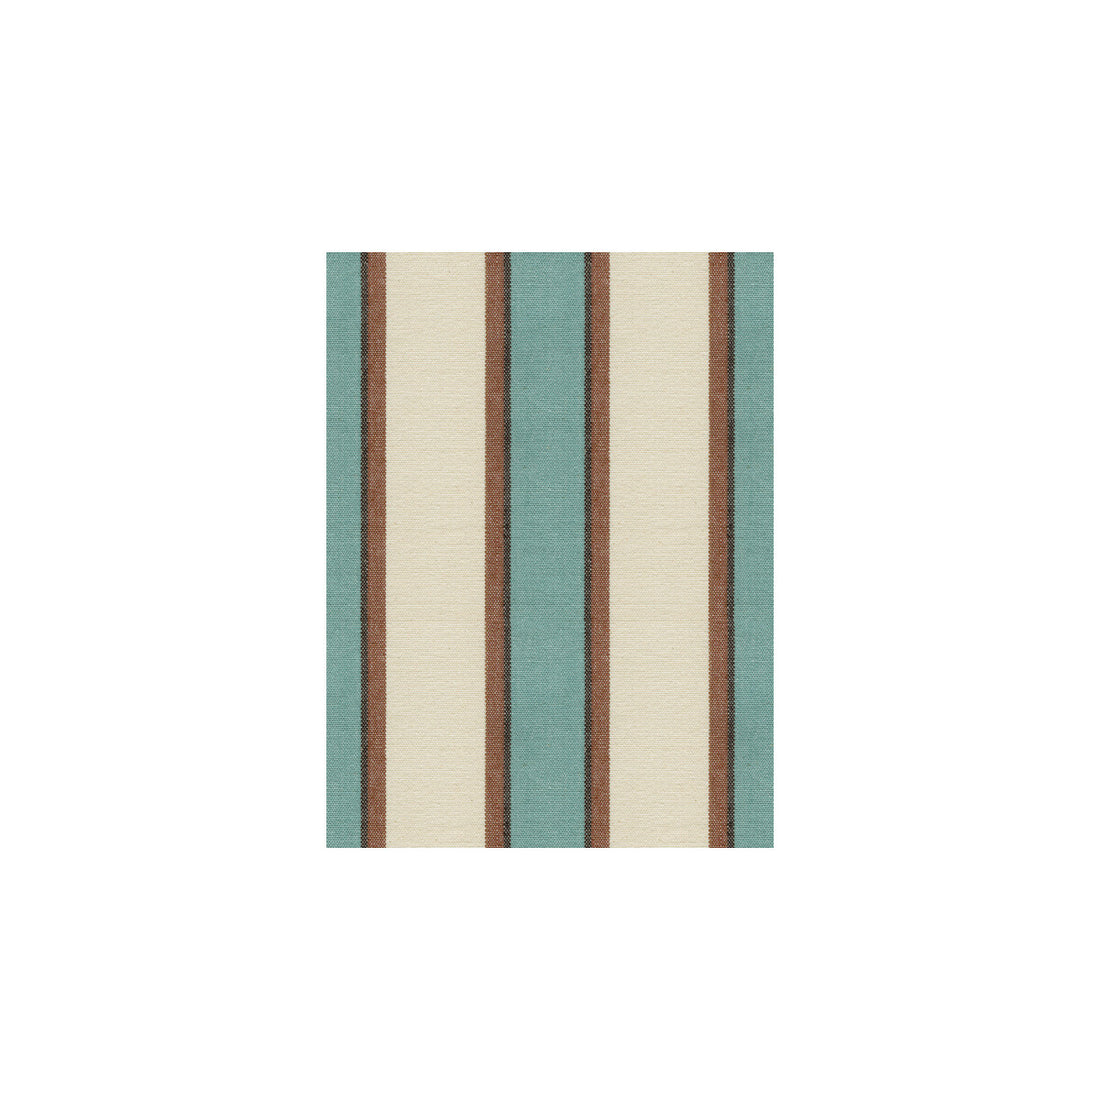 Rugby fabric in turq color - pattern 30810.516.0 - by Kravet Basics in the Thom Filicia collection